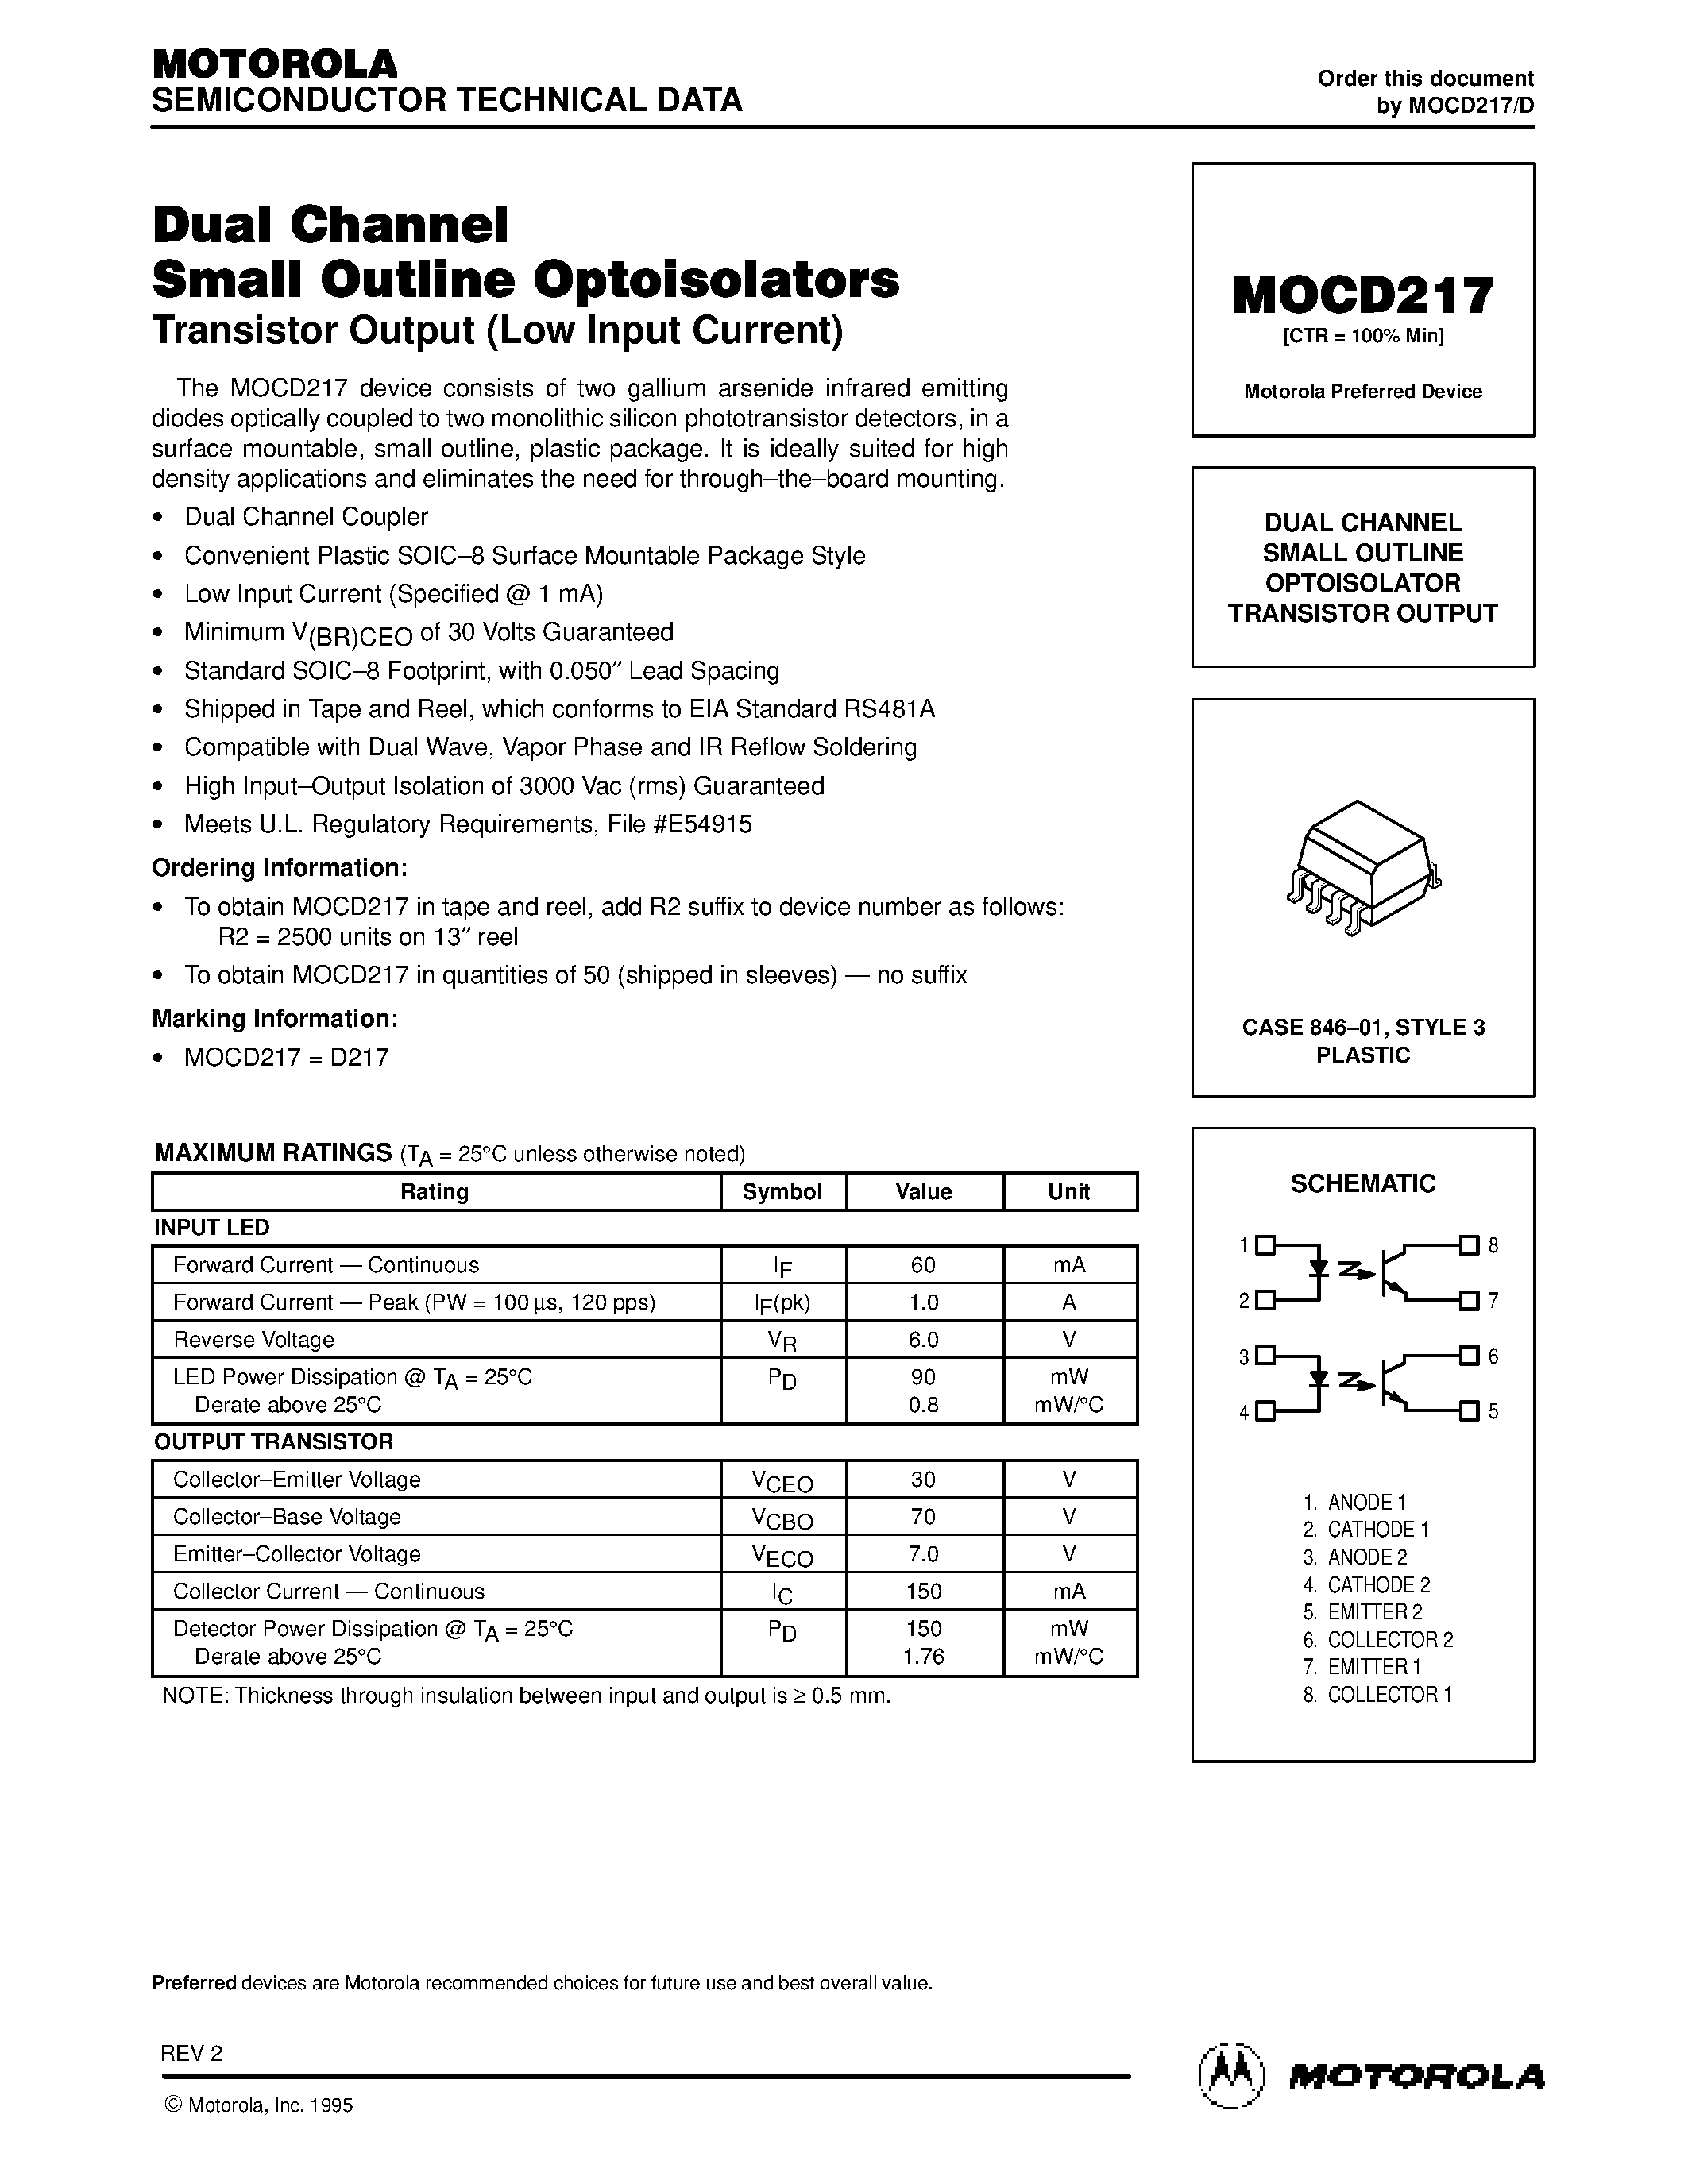 Даташит MOCD217 - DUAL CHANNEL SMALL OUTLINE OPTOISOLATOR TRANSISTOR OUTPUT страница 1